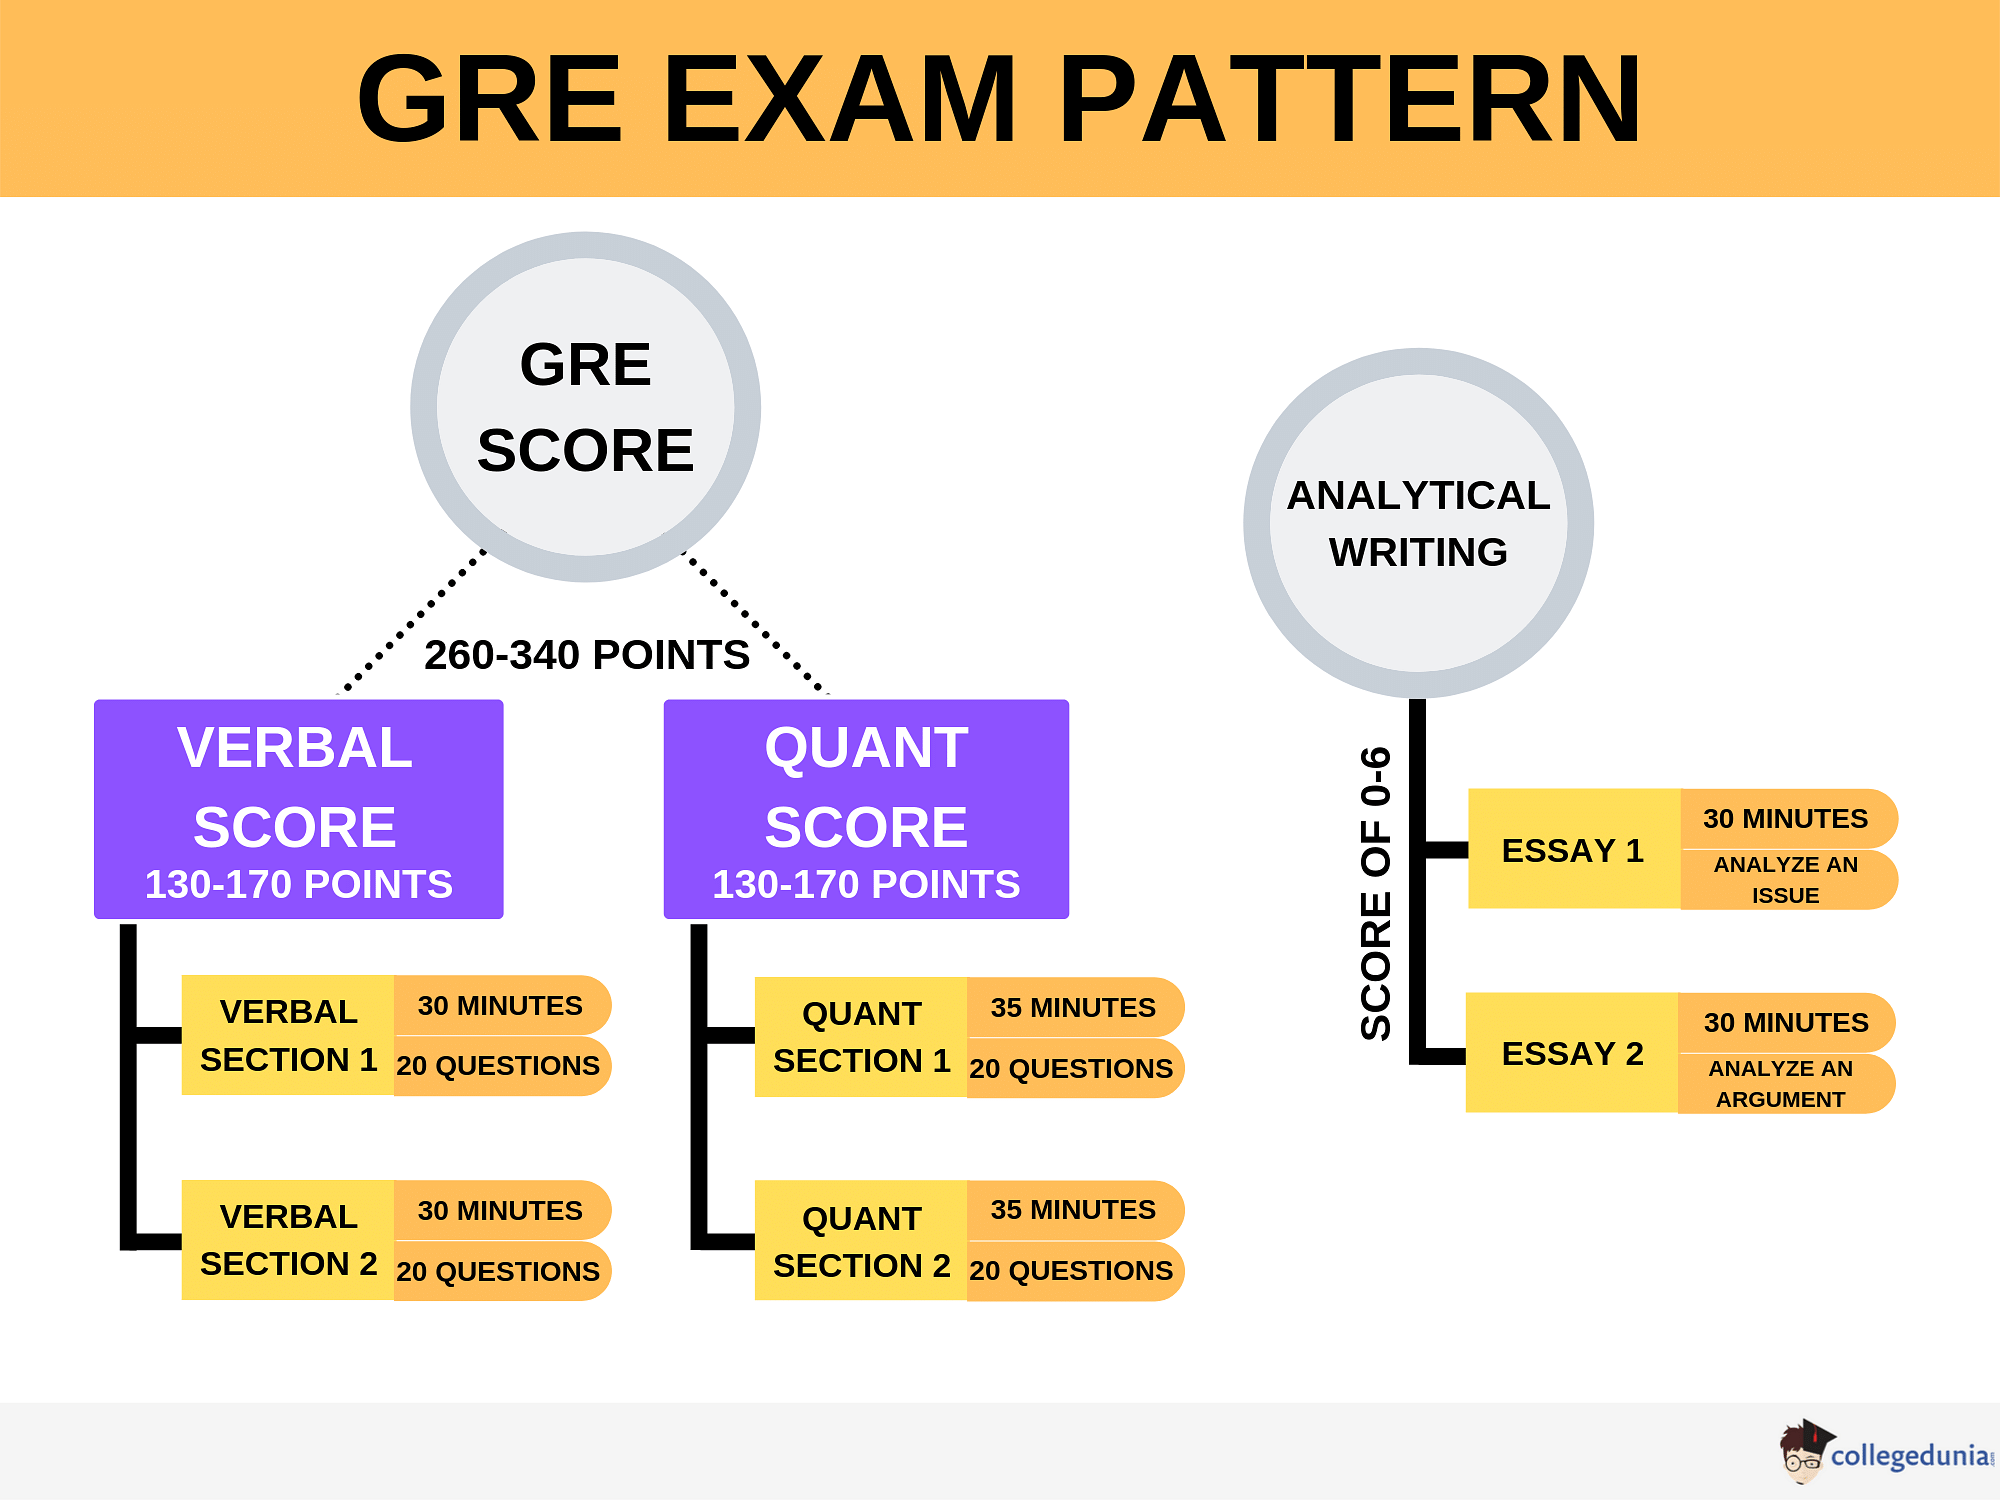 GRE 2020: Exam Pattern and Syllabus for GRE General & GRE Subject tests